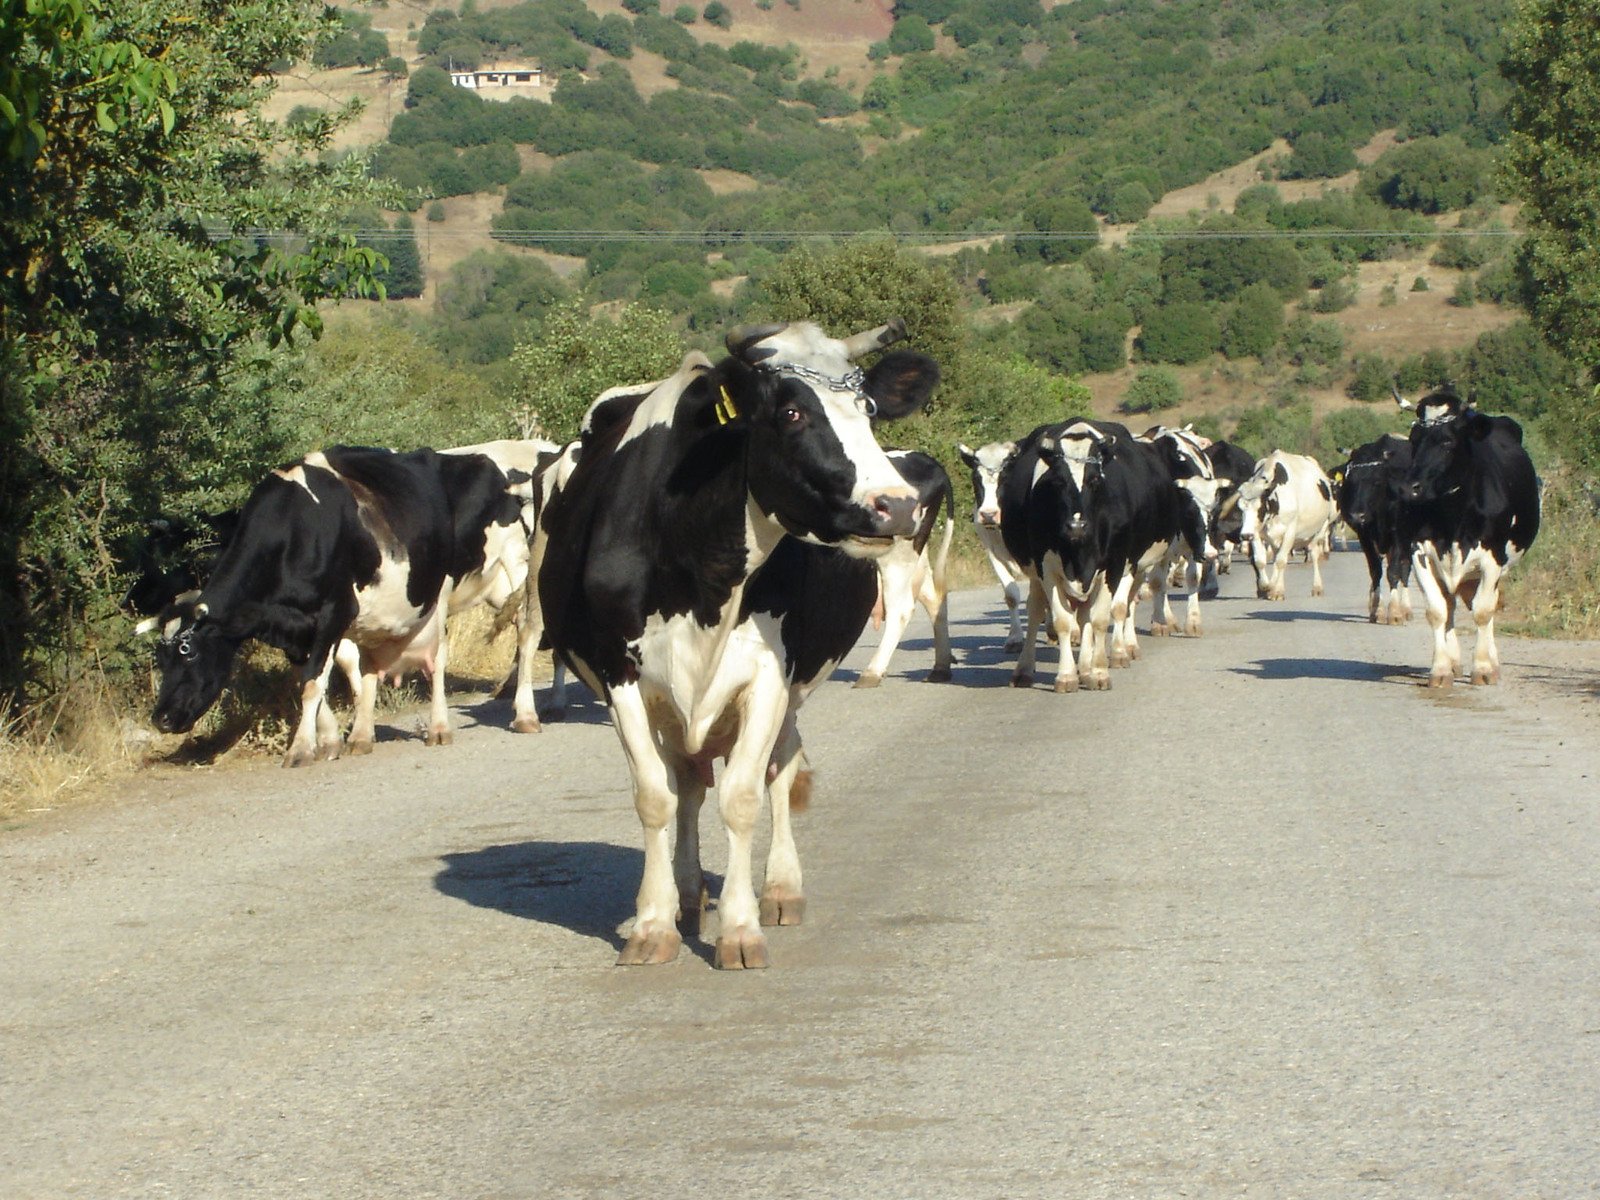 some black and white cows are on the road